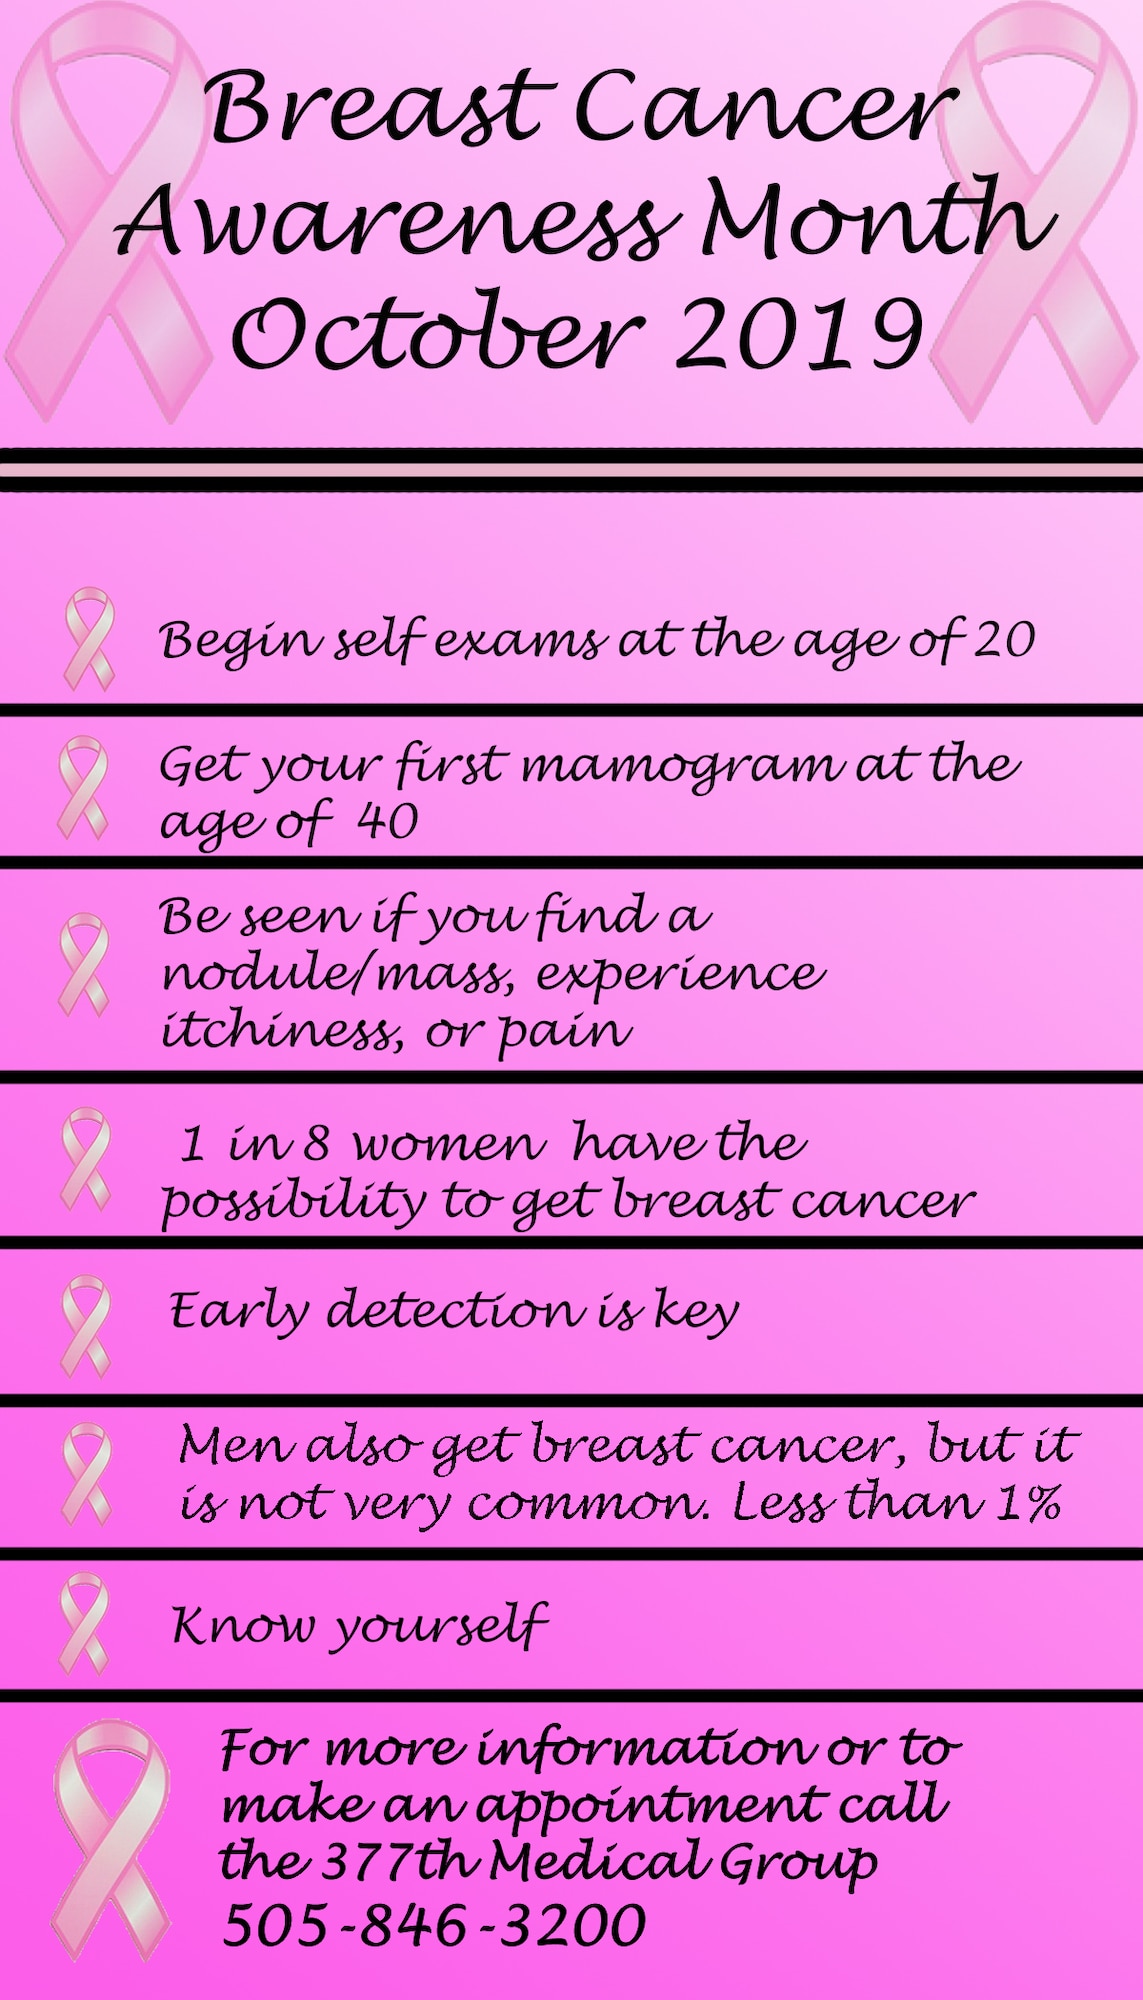 Breast Cancer Awareness - Women Should Now Start Screening at Age